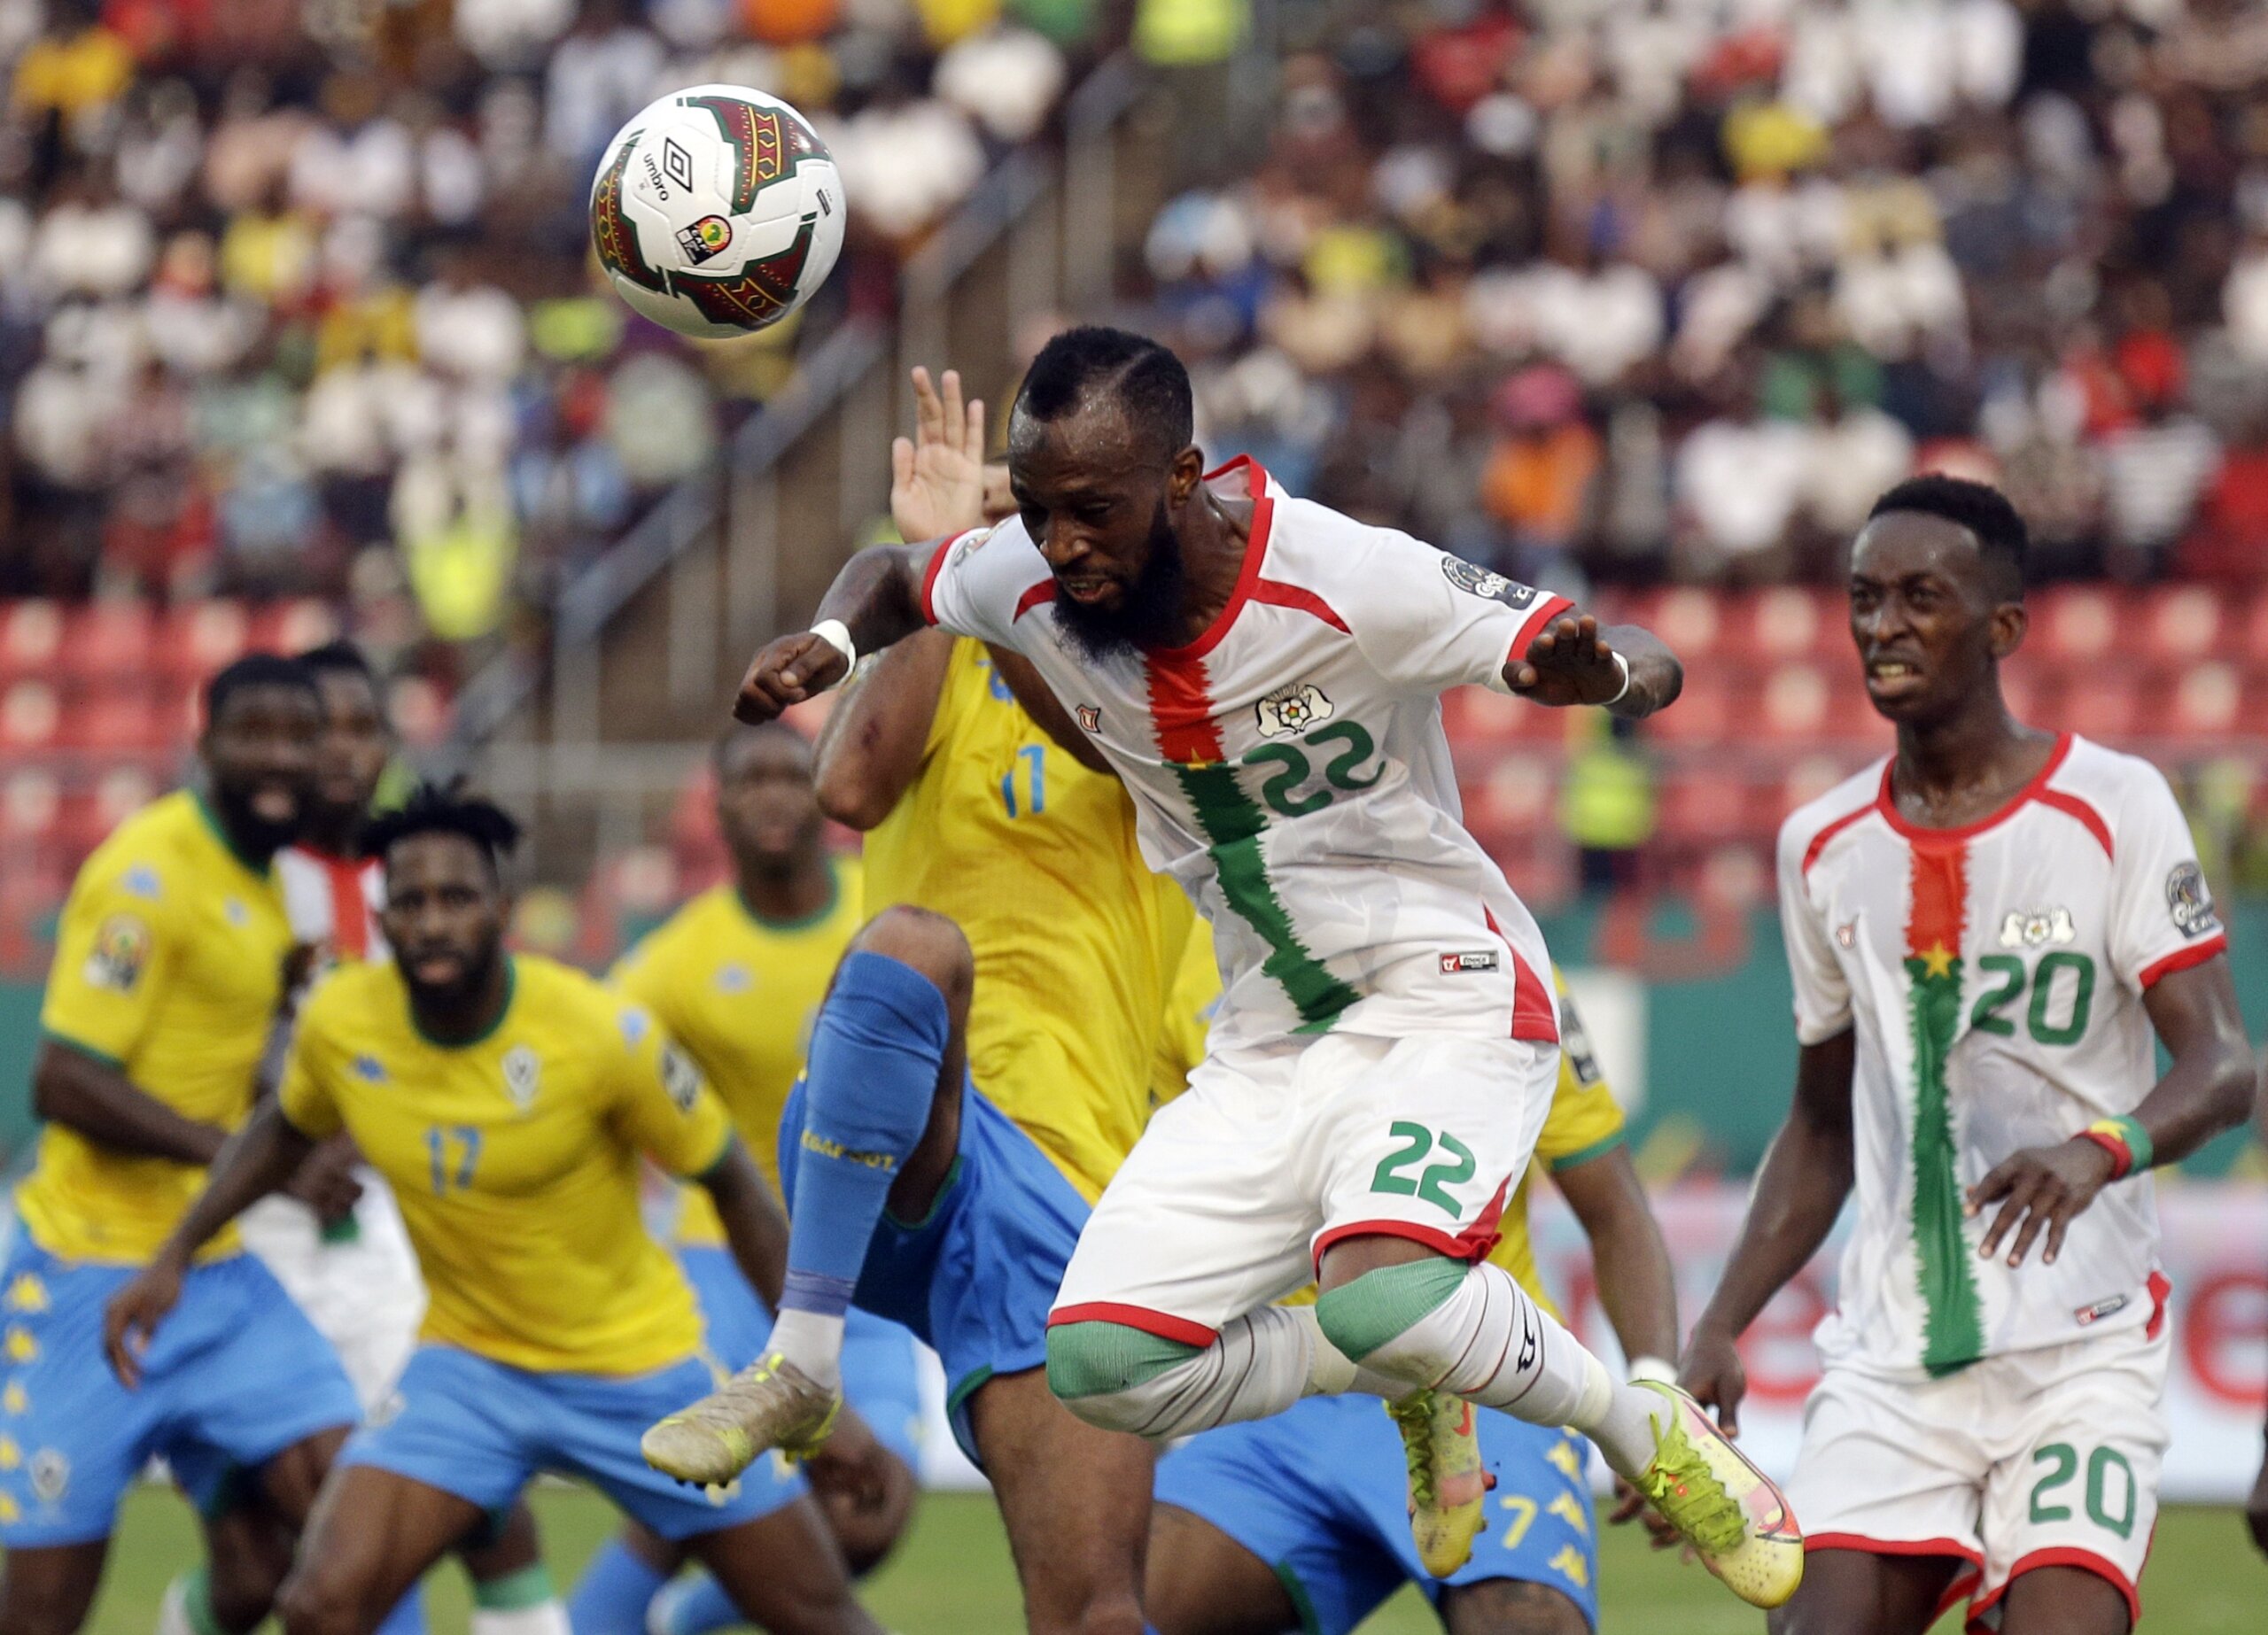 Tunisia knocks Nigeria out of African Cup - WTOP News